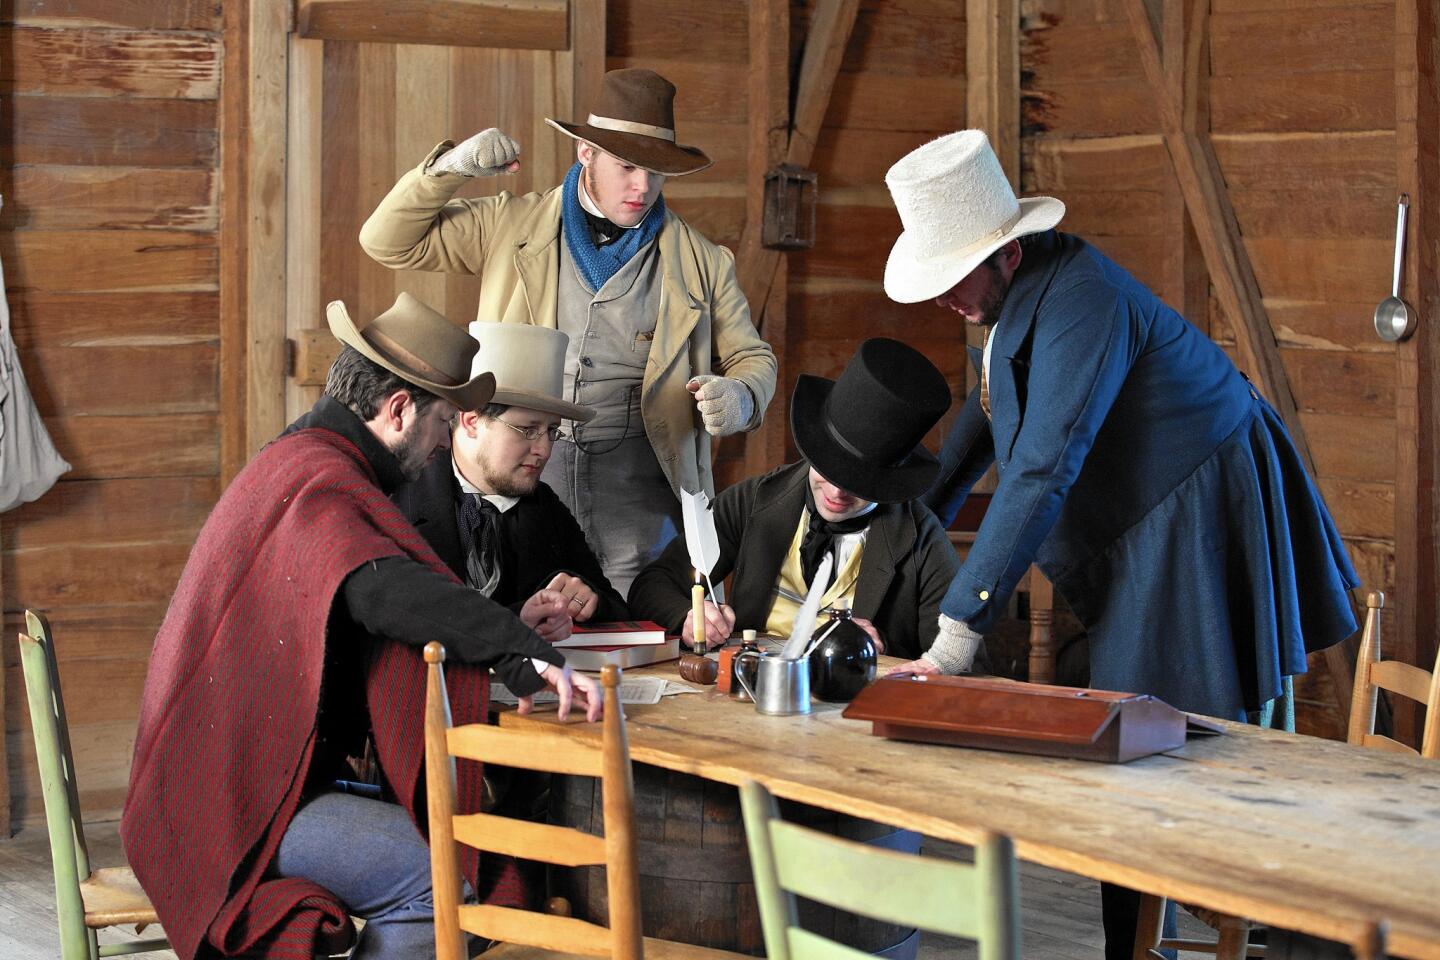 Men in period costume re-enact the signing of the Texas Declaration of Independence during a special ceremony.